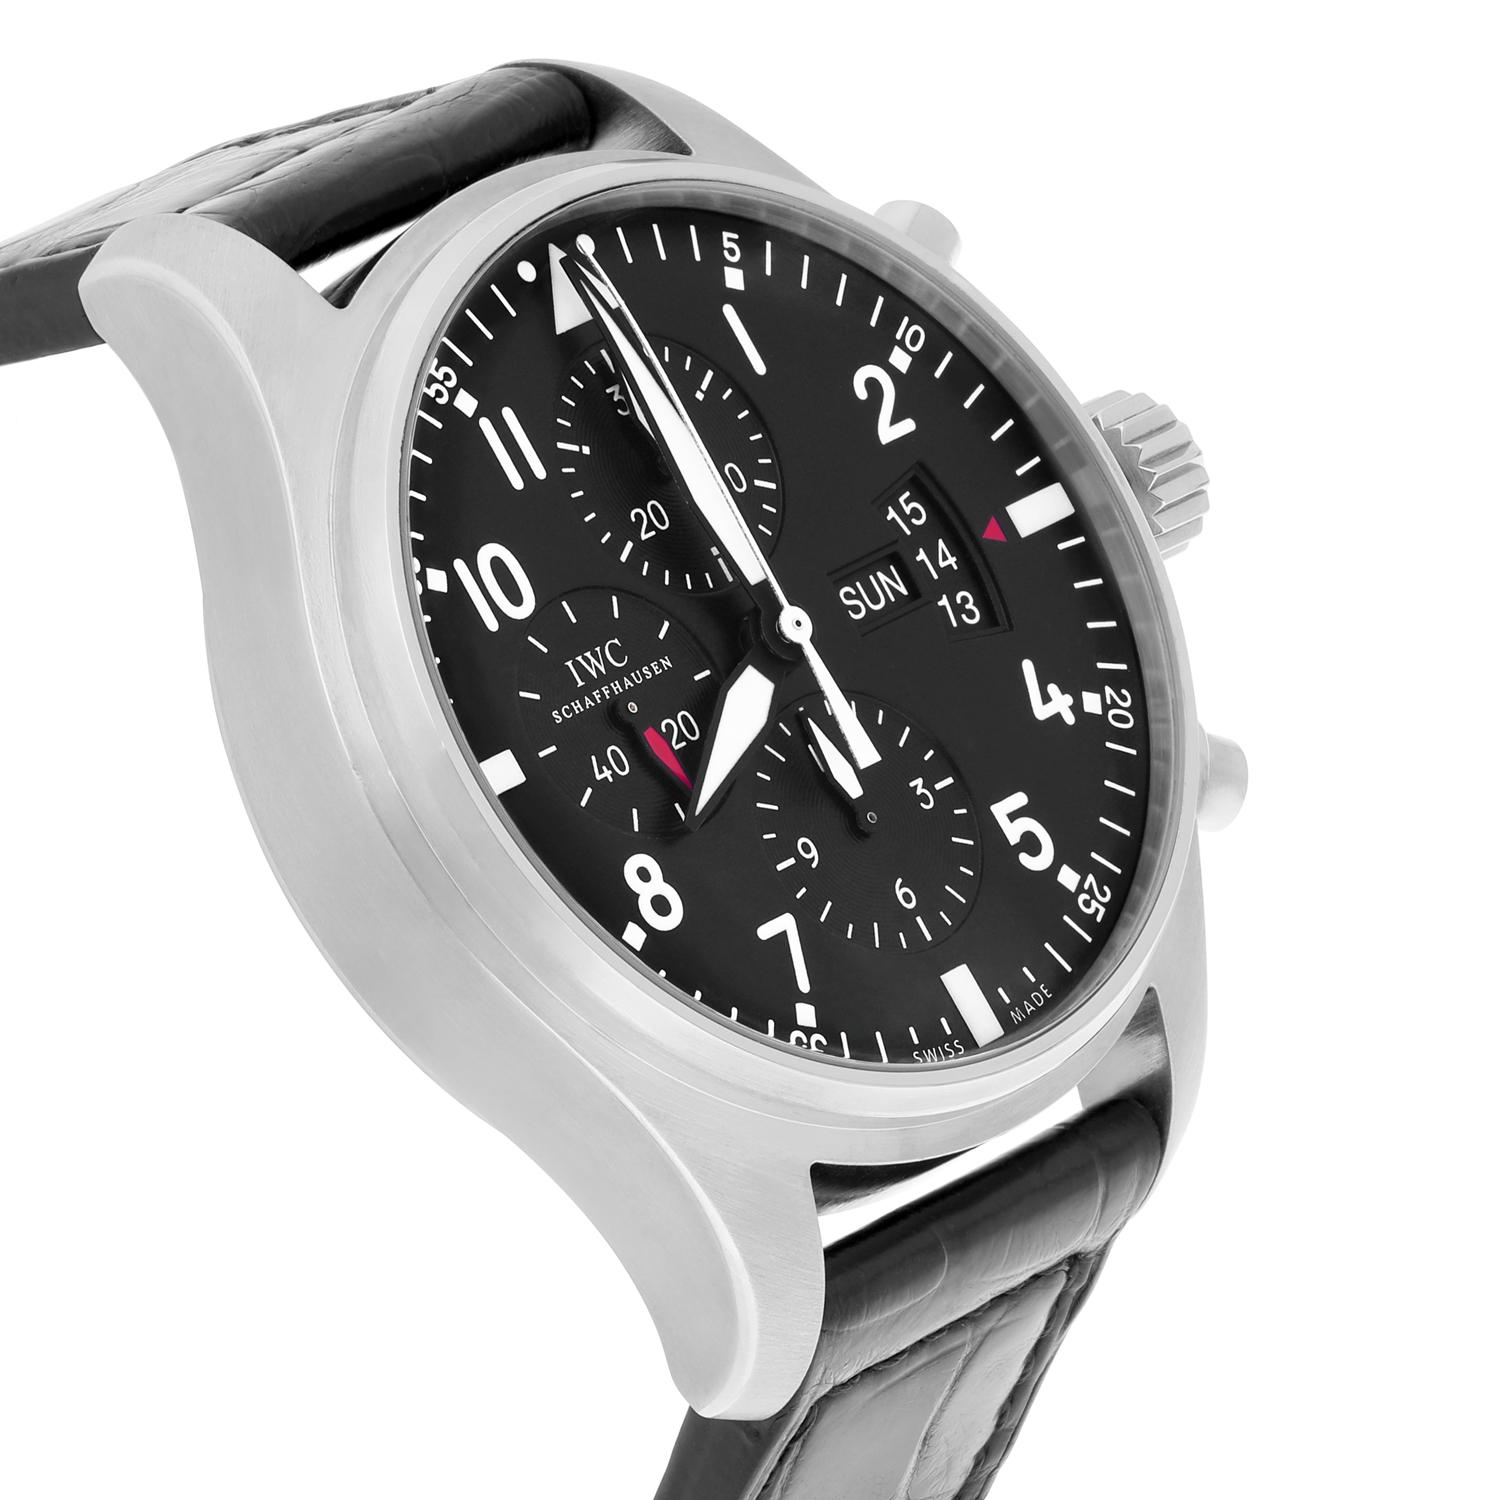 IWC Pilot watch IW377701 Chronograph Stainless Steel Mens Watch Leather Band 1